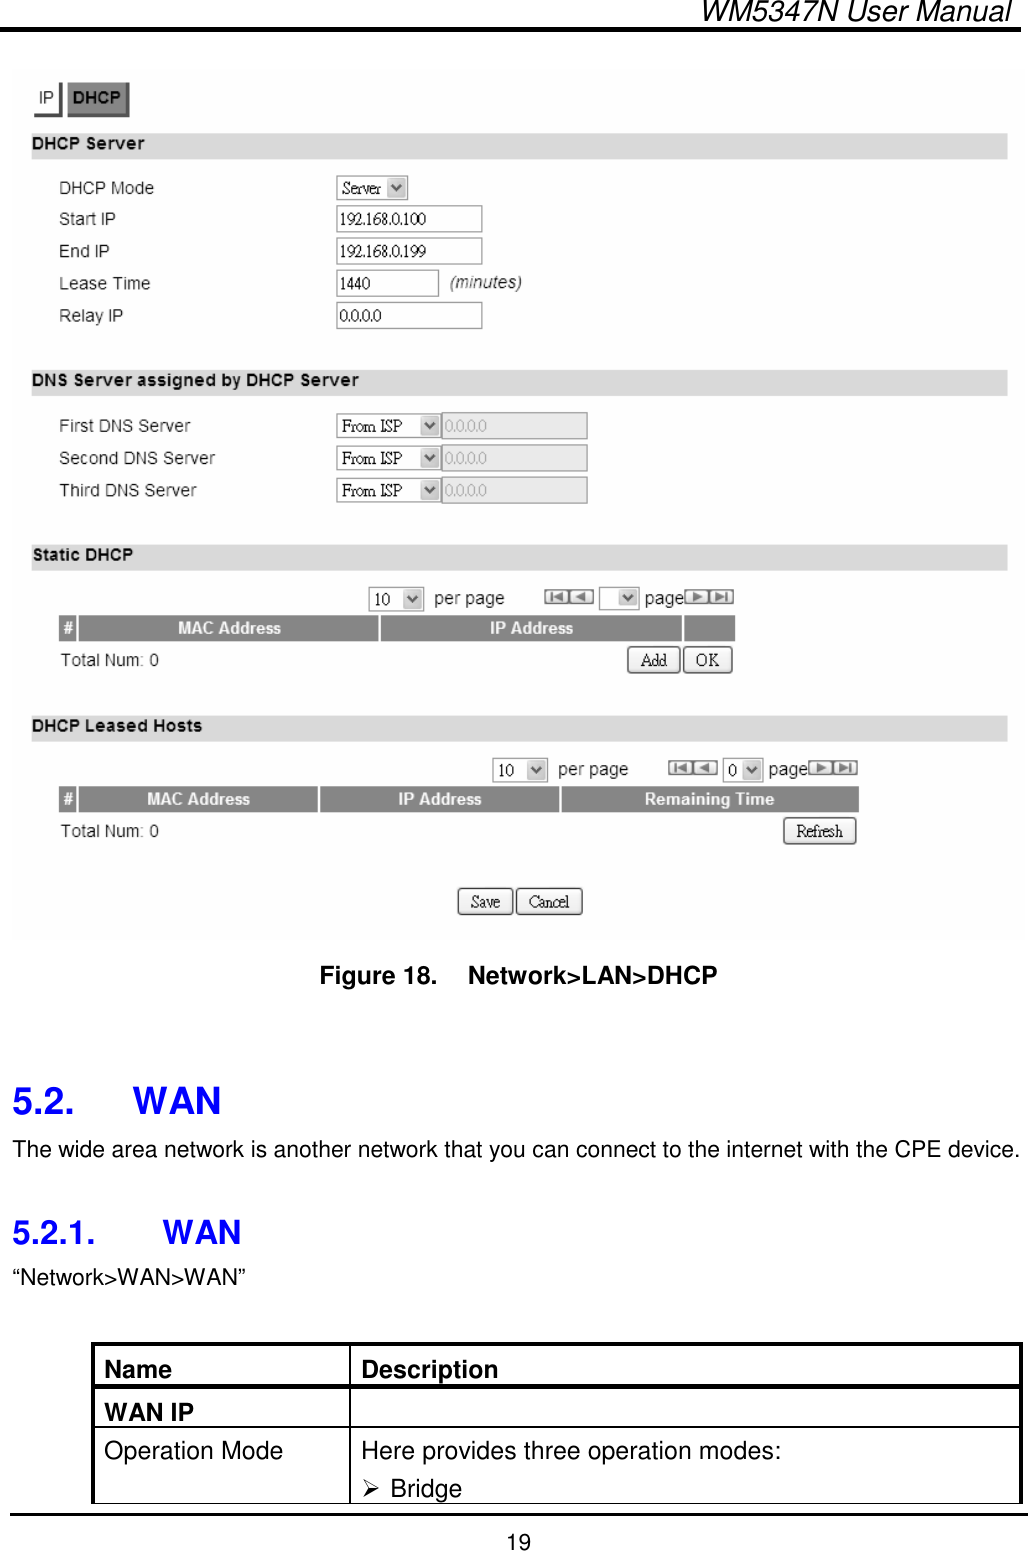  WM5347N User Manual  19  Figure 18.   Network&gt;LAN&gt;DHCP   5.2.  WAN The wide area network is another network that you can connect to the internet with the CPE device.  5.2.1.  WAN “Network&gt;WAN&gt;WAN”  Name  Description WAN IP   Operation Mode  Here provides three operation modes:  Bridge 